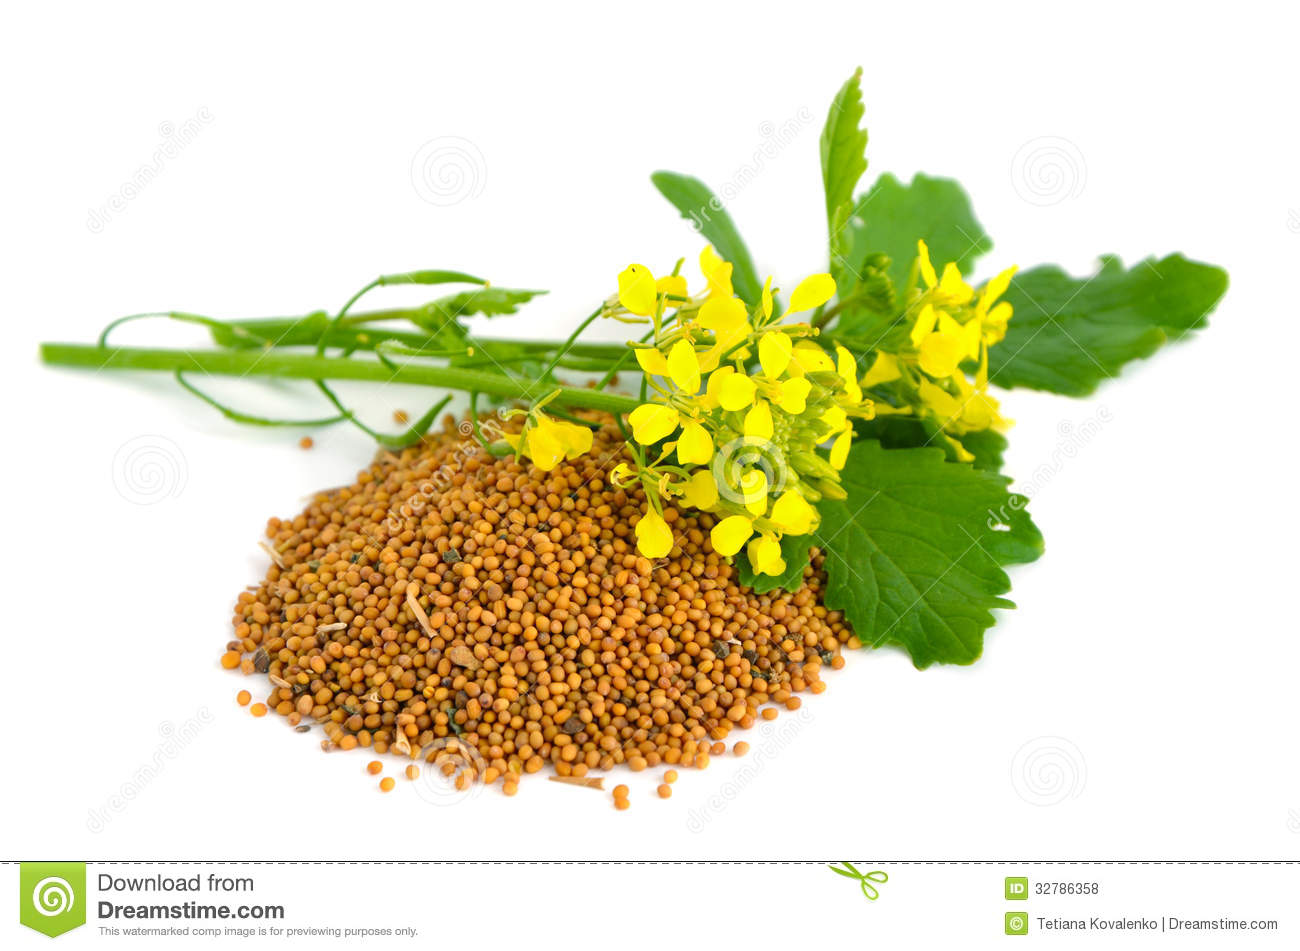 Mustard Flowers And Seed  Royalty Free Stock Photos   Image  32786358